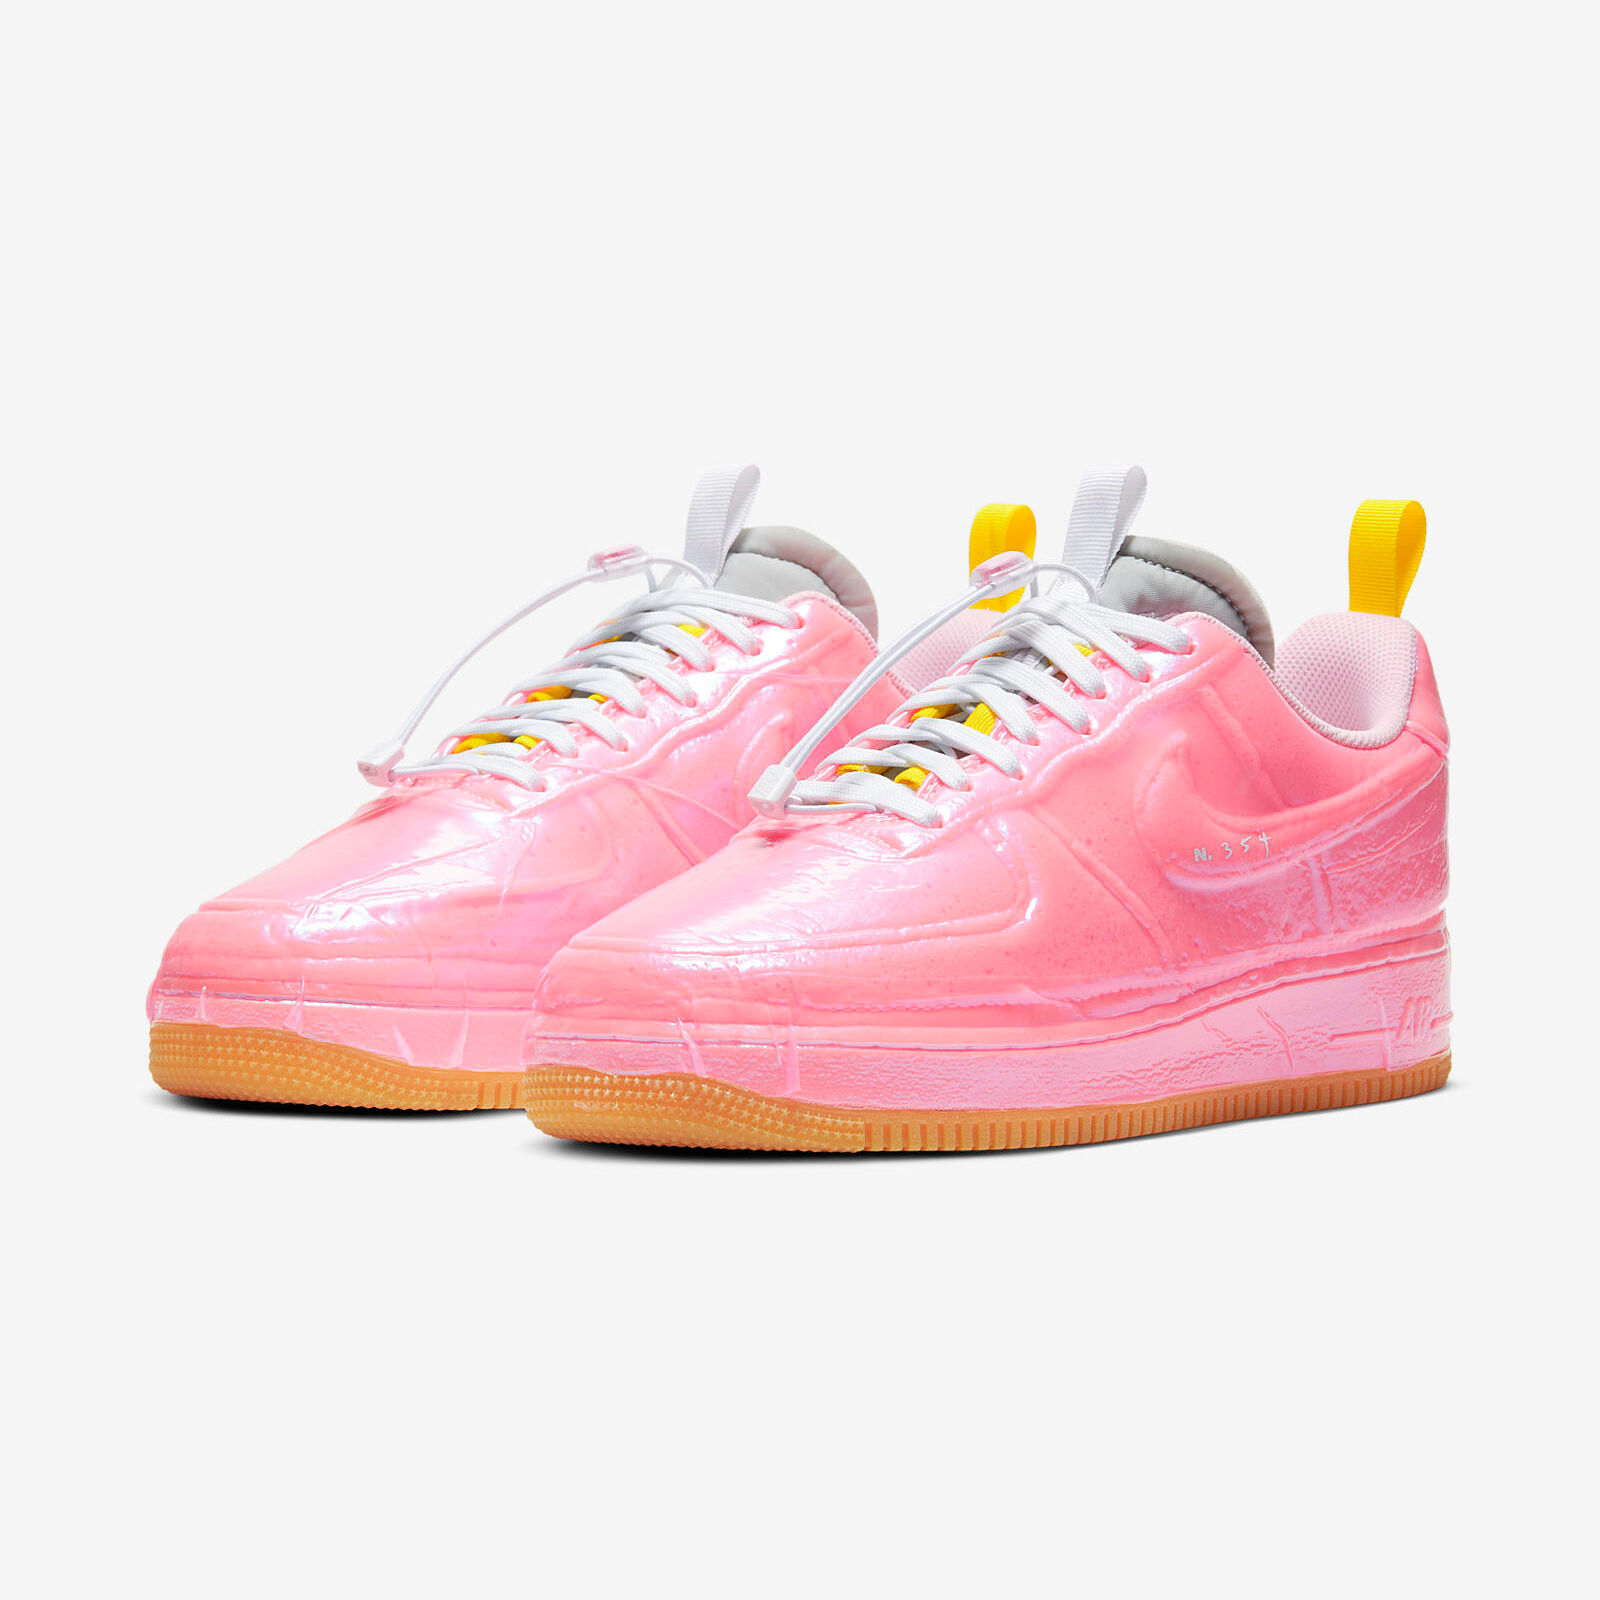 Nike Air Force 1 Low
Experimental
« Racer Pink »